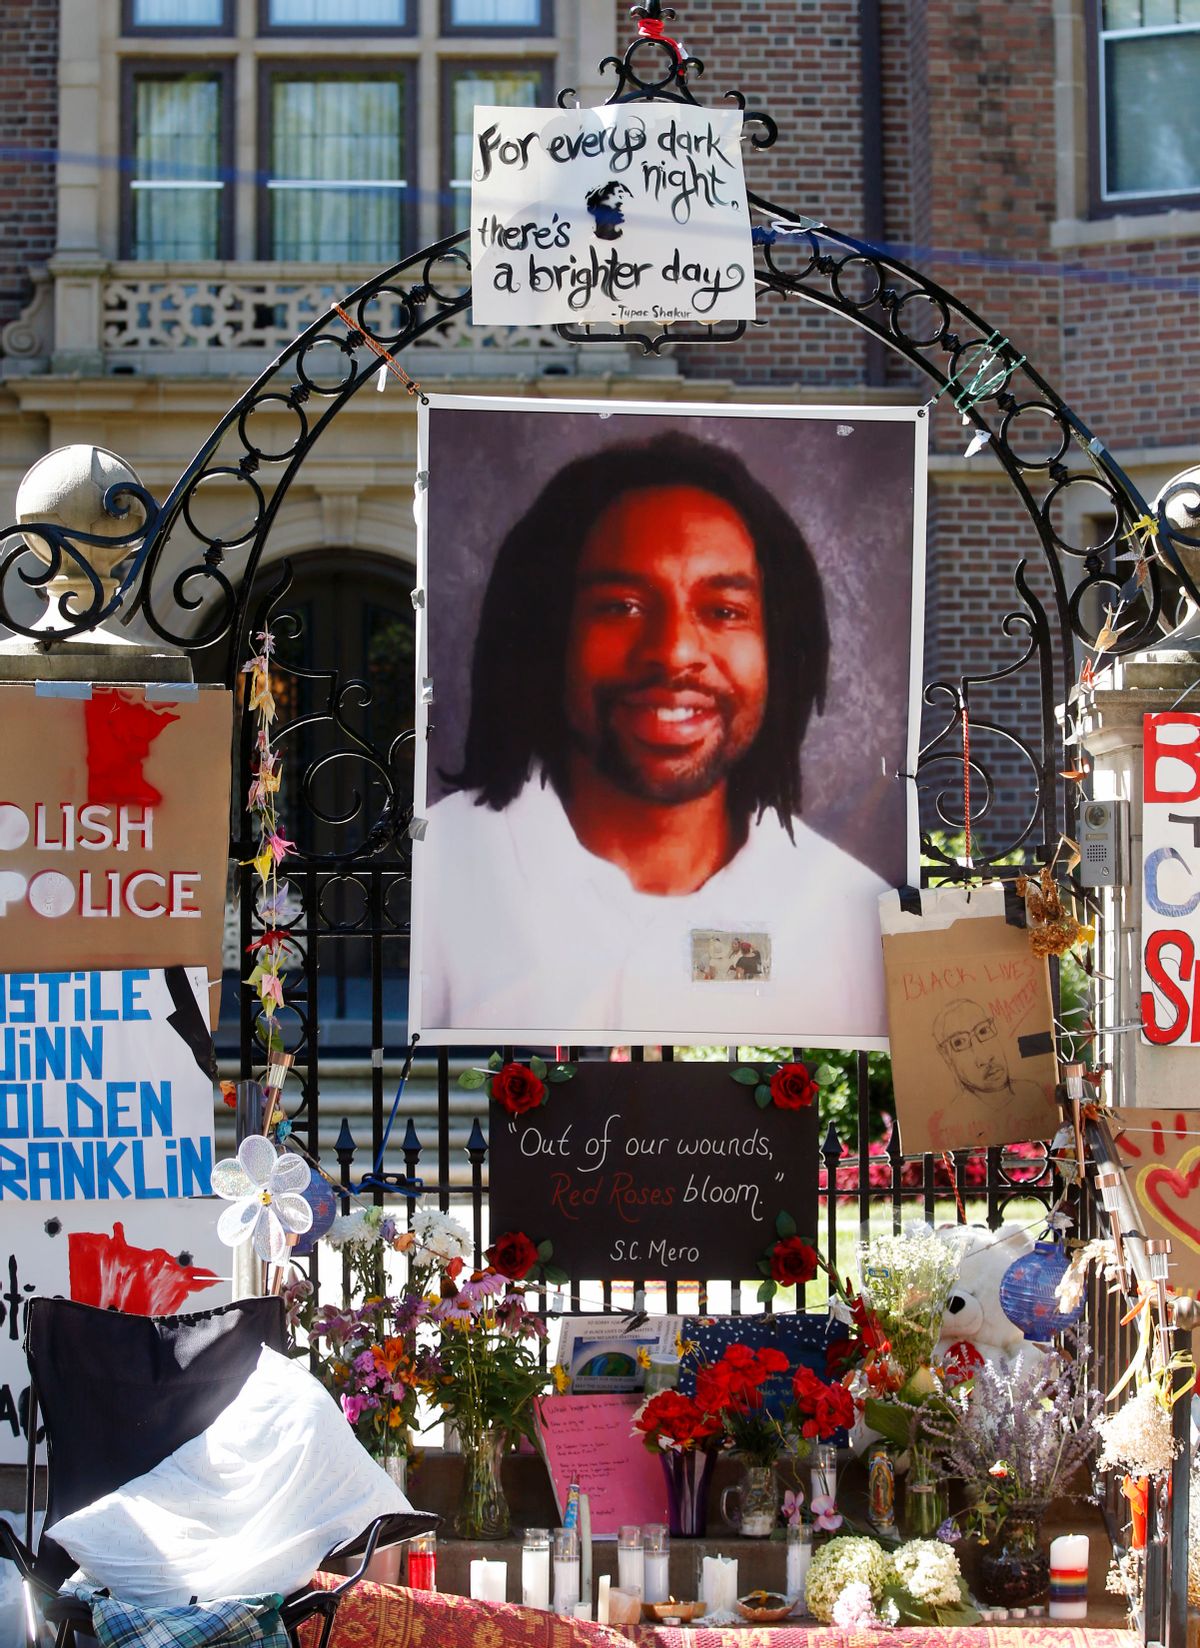 FILE - In this July 25, 2016, file photo, a memorial including a photo of Philando Castile adorns the gate to the governor's residence where protesters continue to demonstrate in St. Paul, Minn., against the July 6, 2016, shooting death of Castile by St. Anthony police Officer Jeronimo Yanez during a traffic stop in Falcon Heights, Minn. Yanez is expected to enter his plea on manslaughter charges during a hearing Monday, Feb. 27, 2017. (AP Photo/Jim Mone, File) (AP)